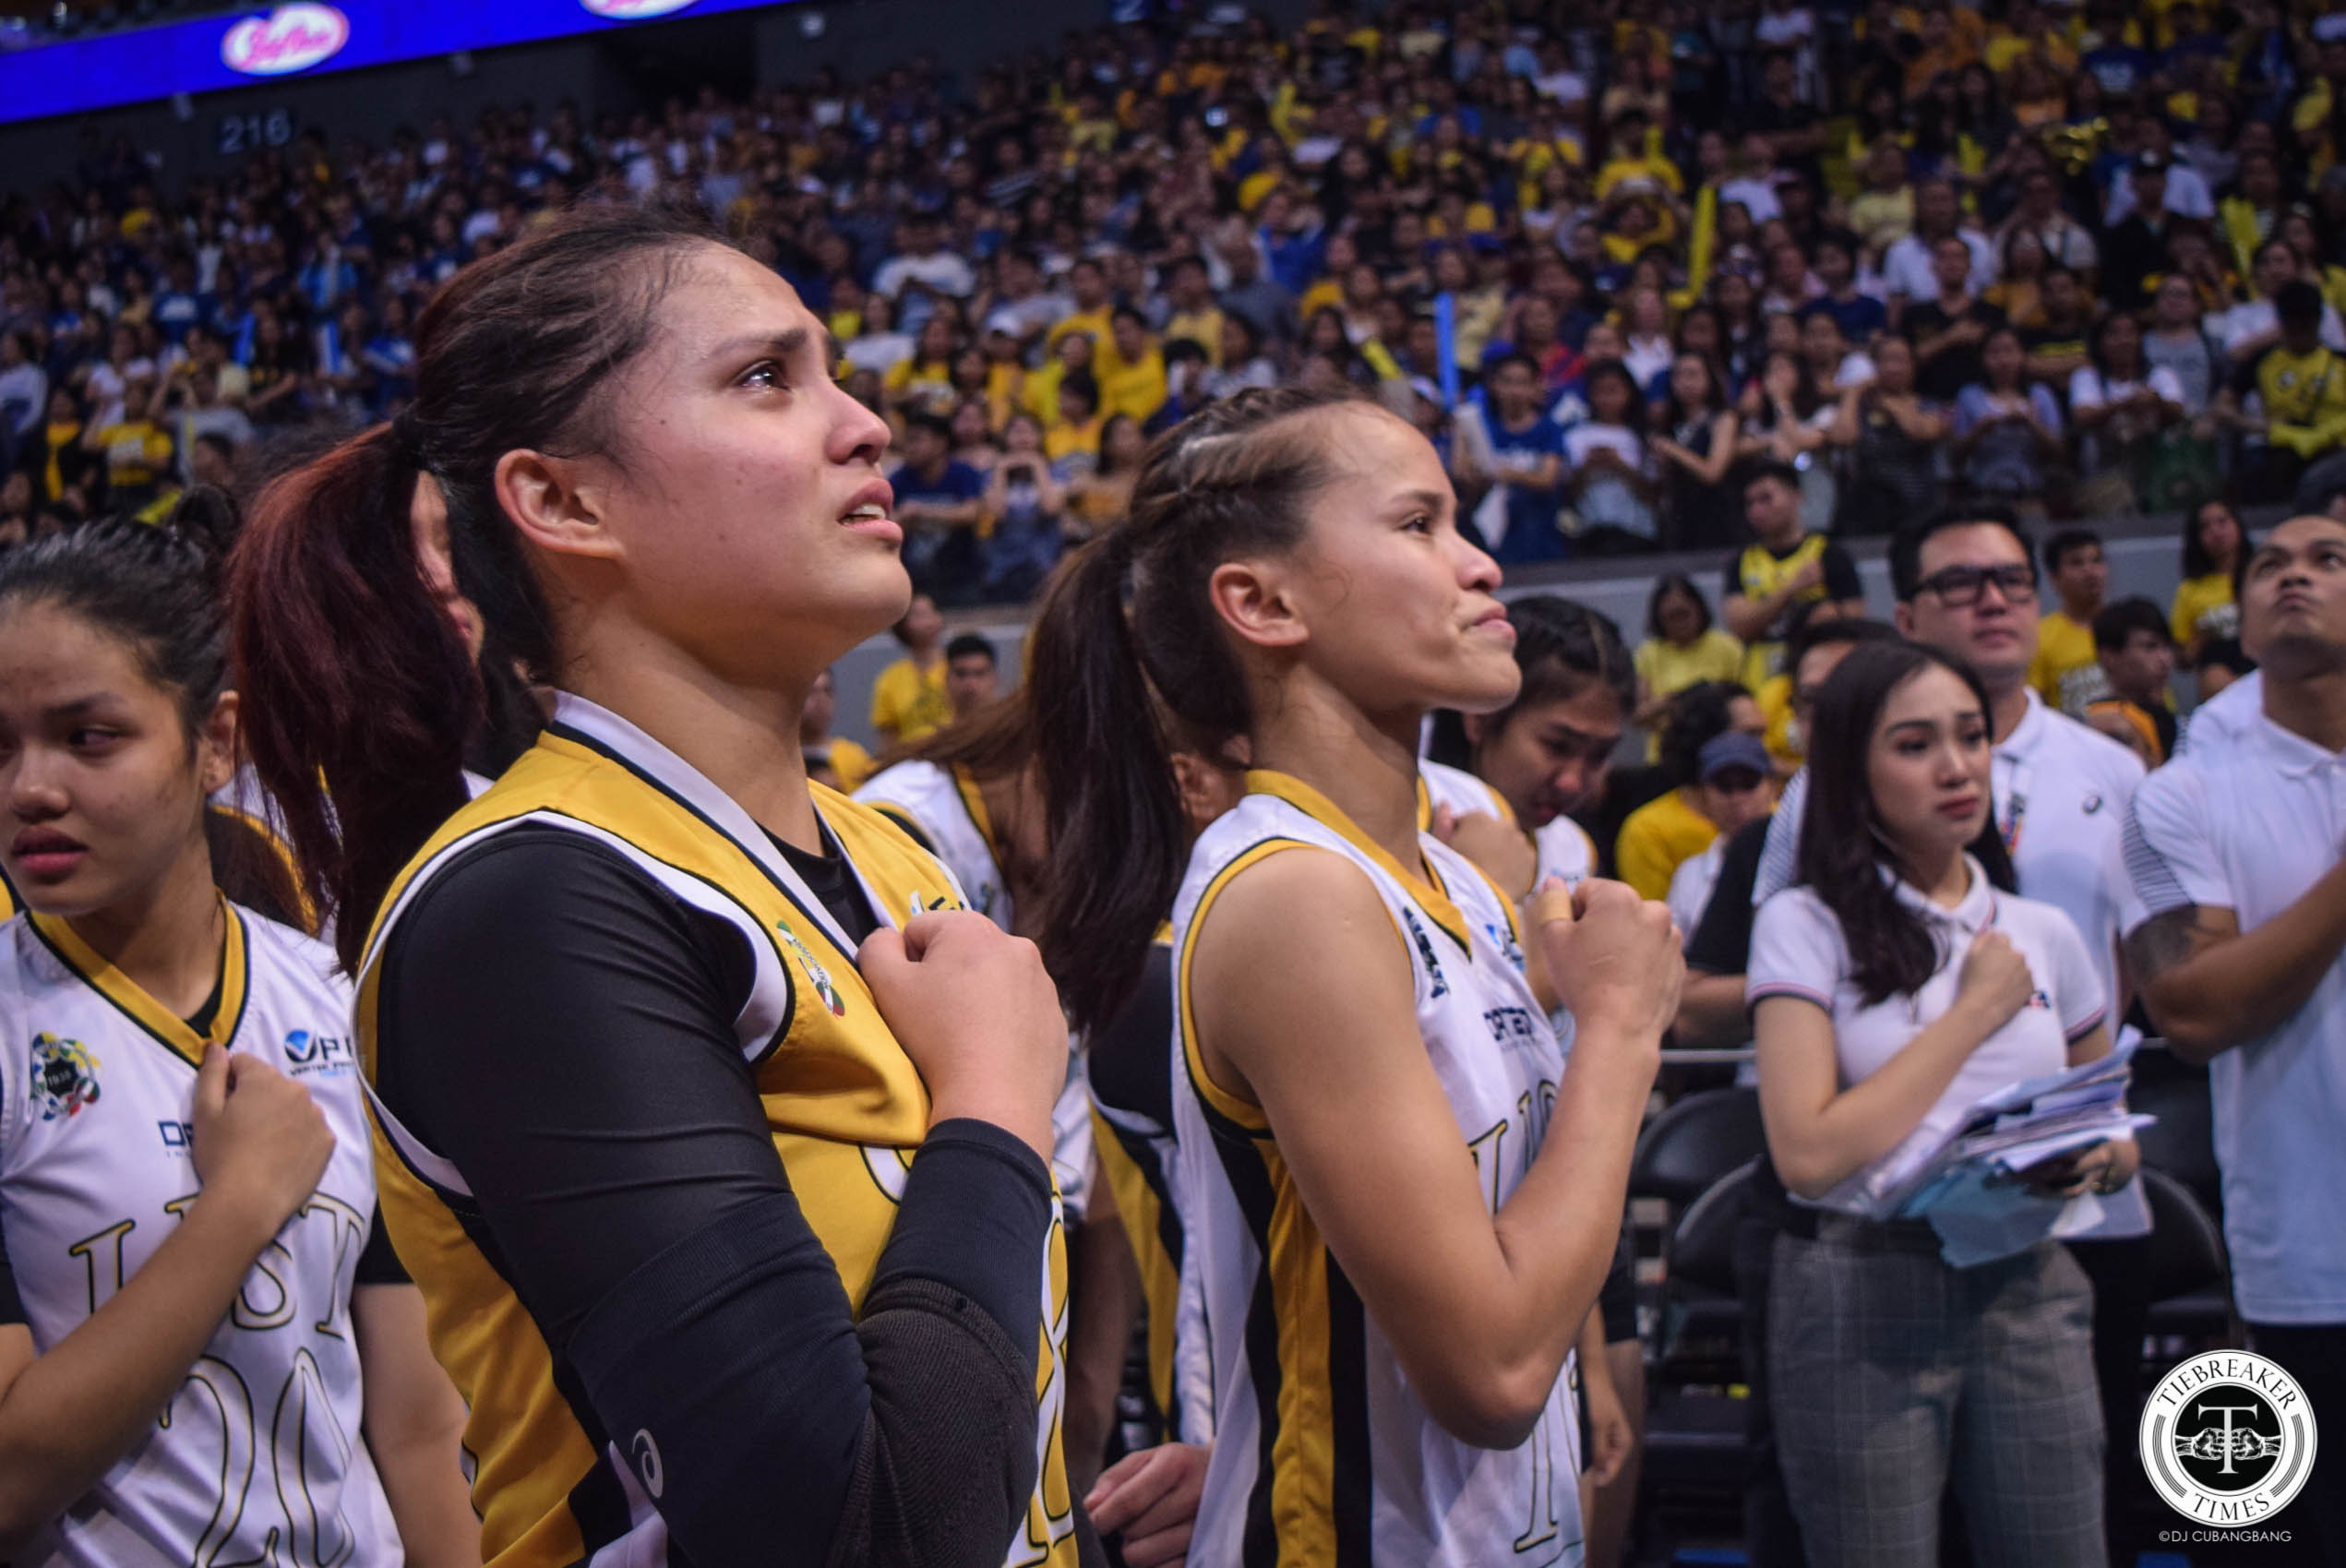 UAAP-Season-81-Womens-Volleyball-Finals-Game-3-ADMU-def-UST-rivera-x-rondina Ateneo Lady Eagles in unison: 'Sisi Rondina made everything so much harder' ADMU News UAAP UST Volleyball  - philippine sports news